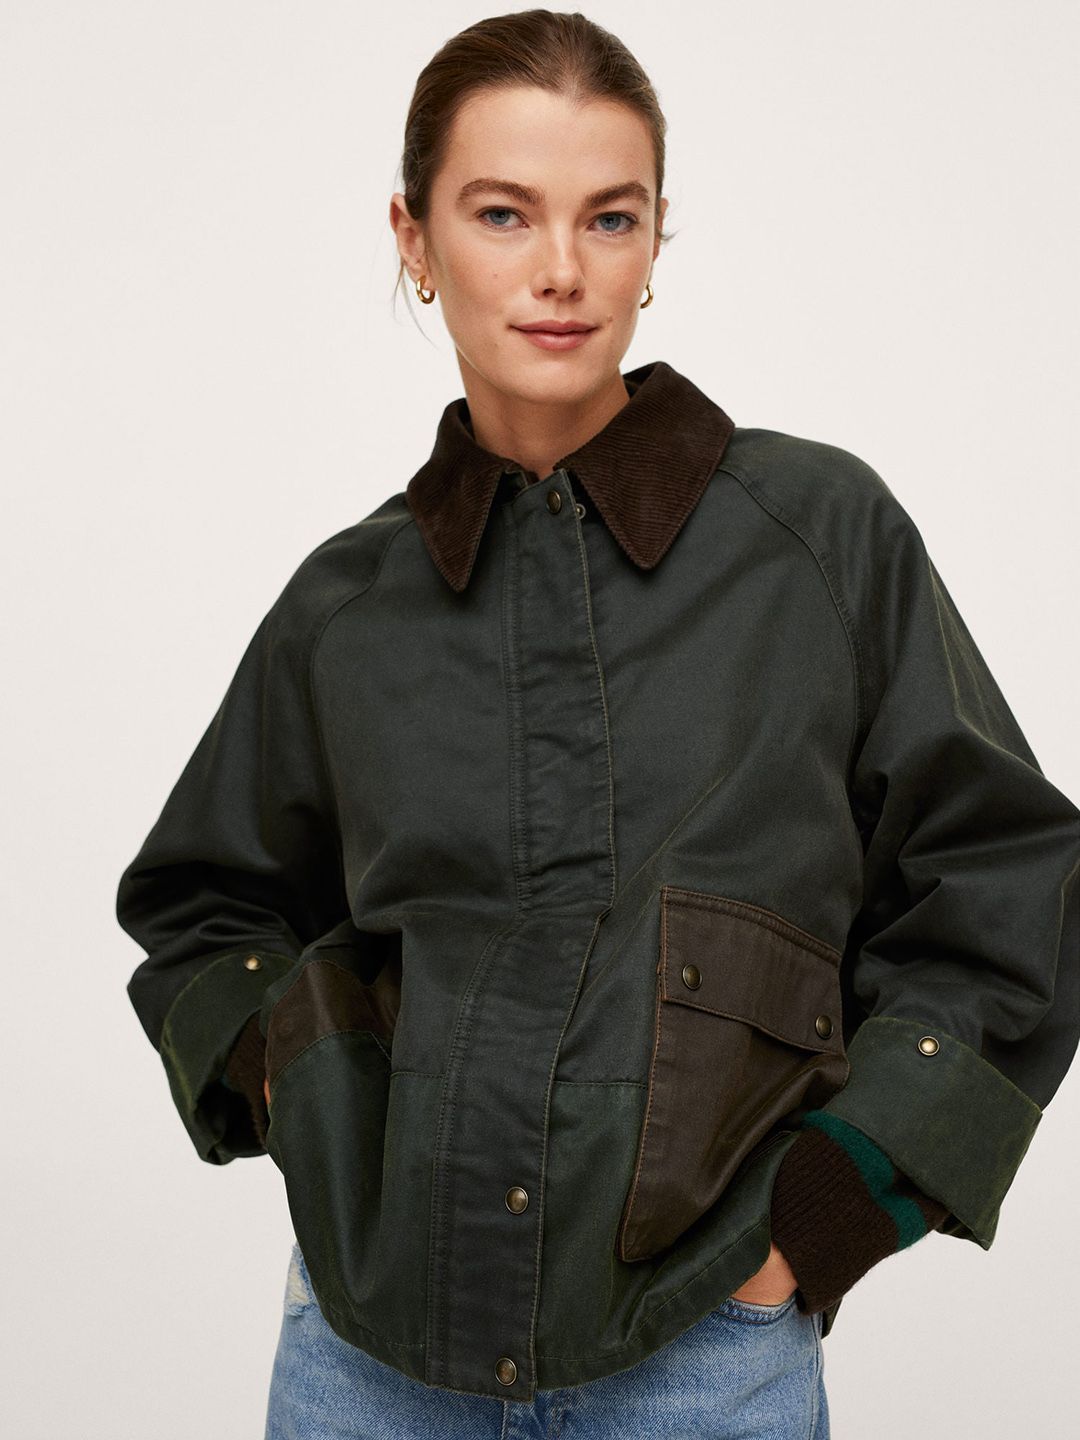 MANGO Women Olive Green Solid Tailored Jacket Price in India